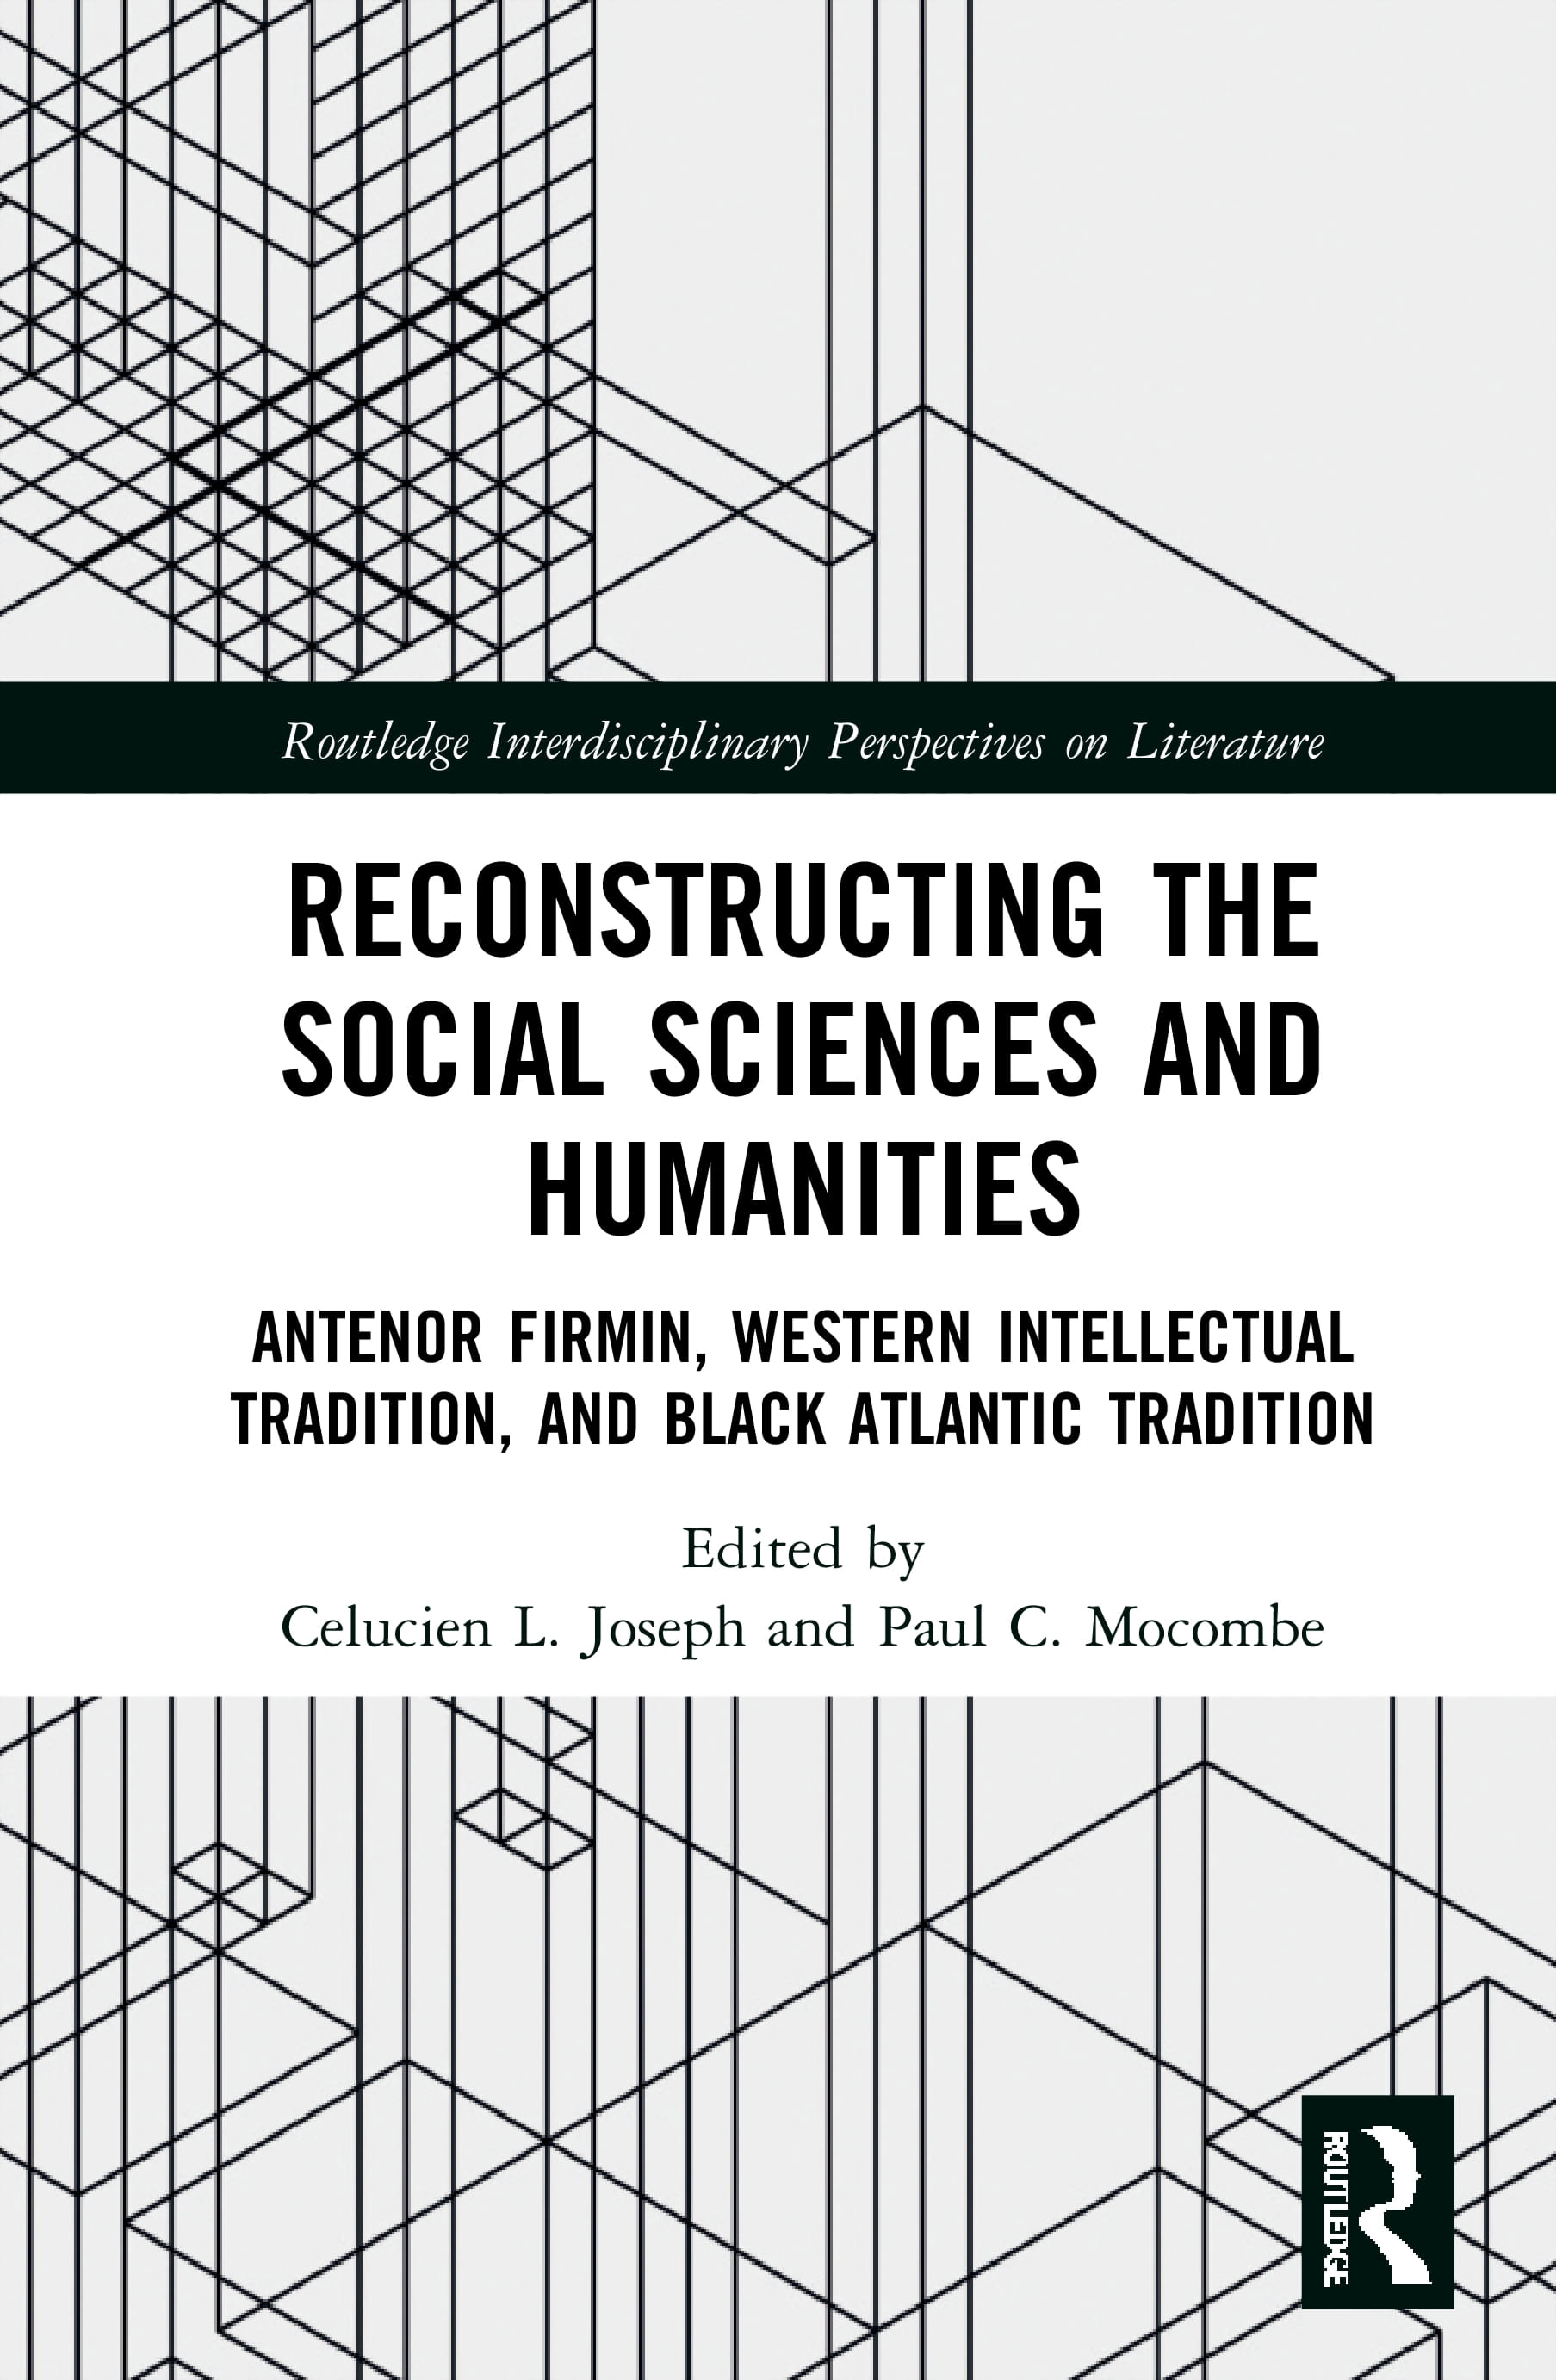 Reconstructing the Social Sciences and Humanities: Antenor Firmin, Western Intellectual Tradition, and Black Atlantic Tradition